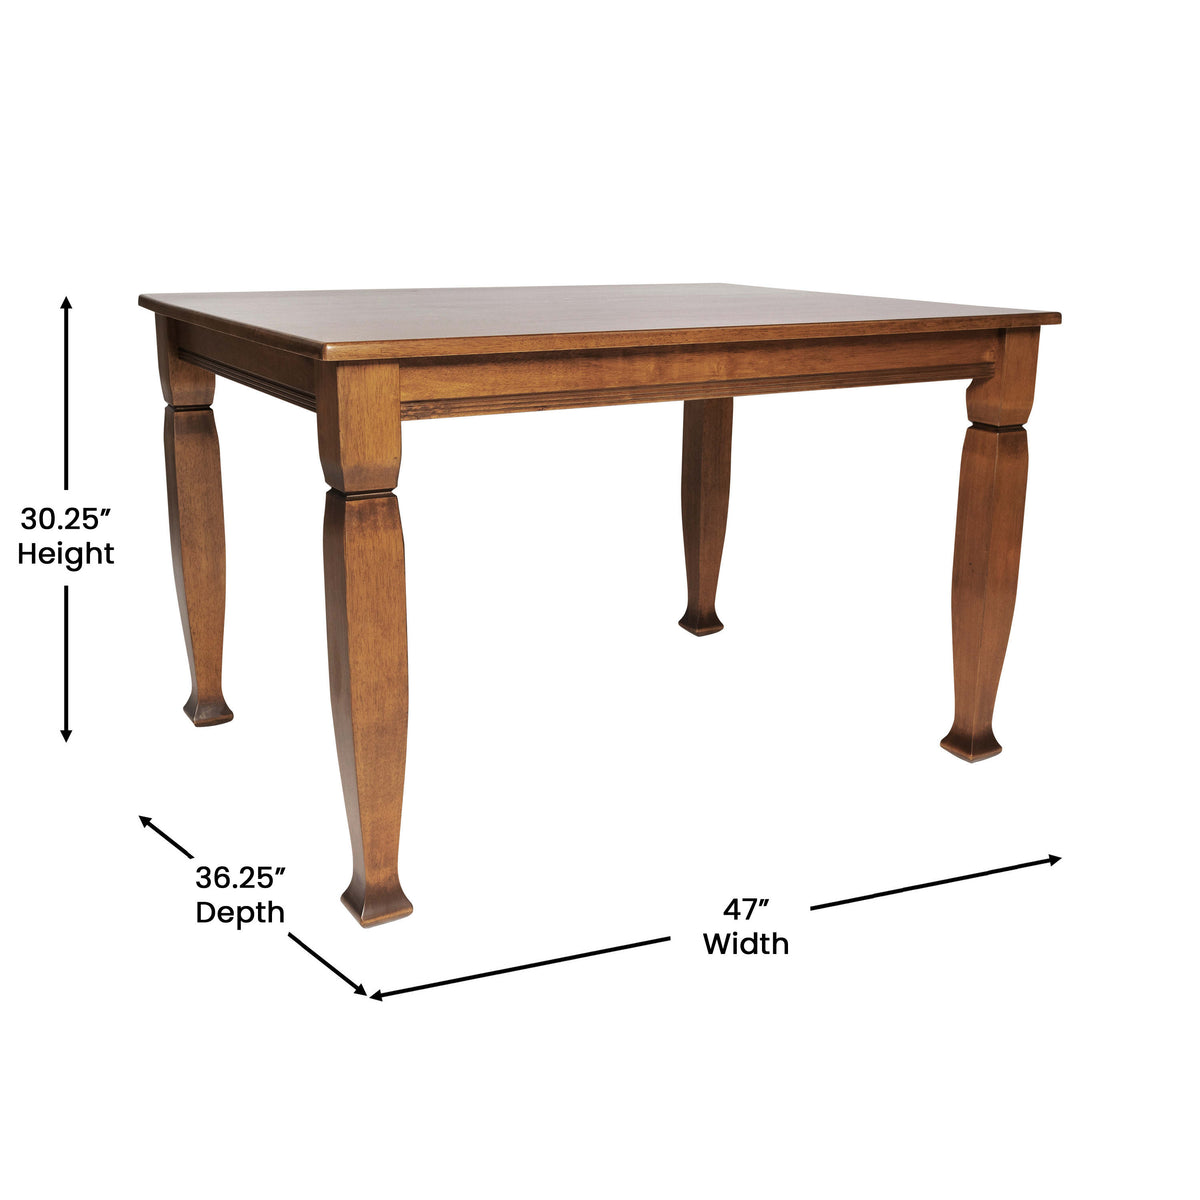 Walnut Matte |#| Solid Wood 47inch Commercial Grade Dining Table with Turned Legs in Walnut Matte